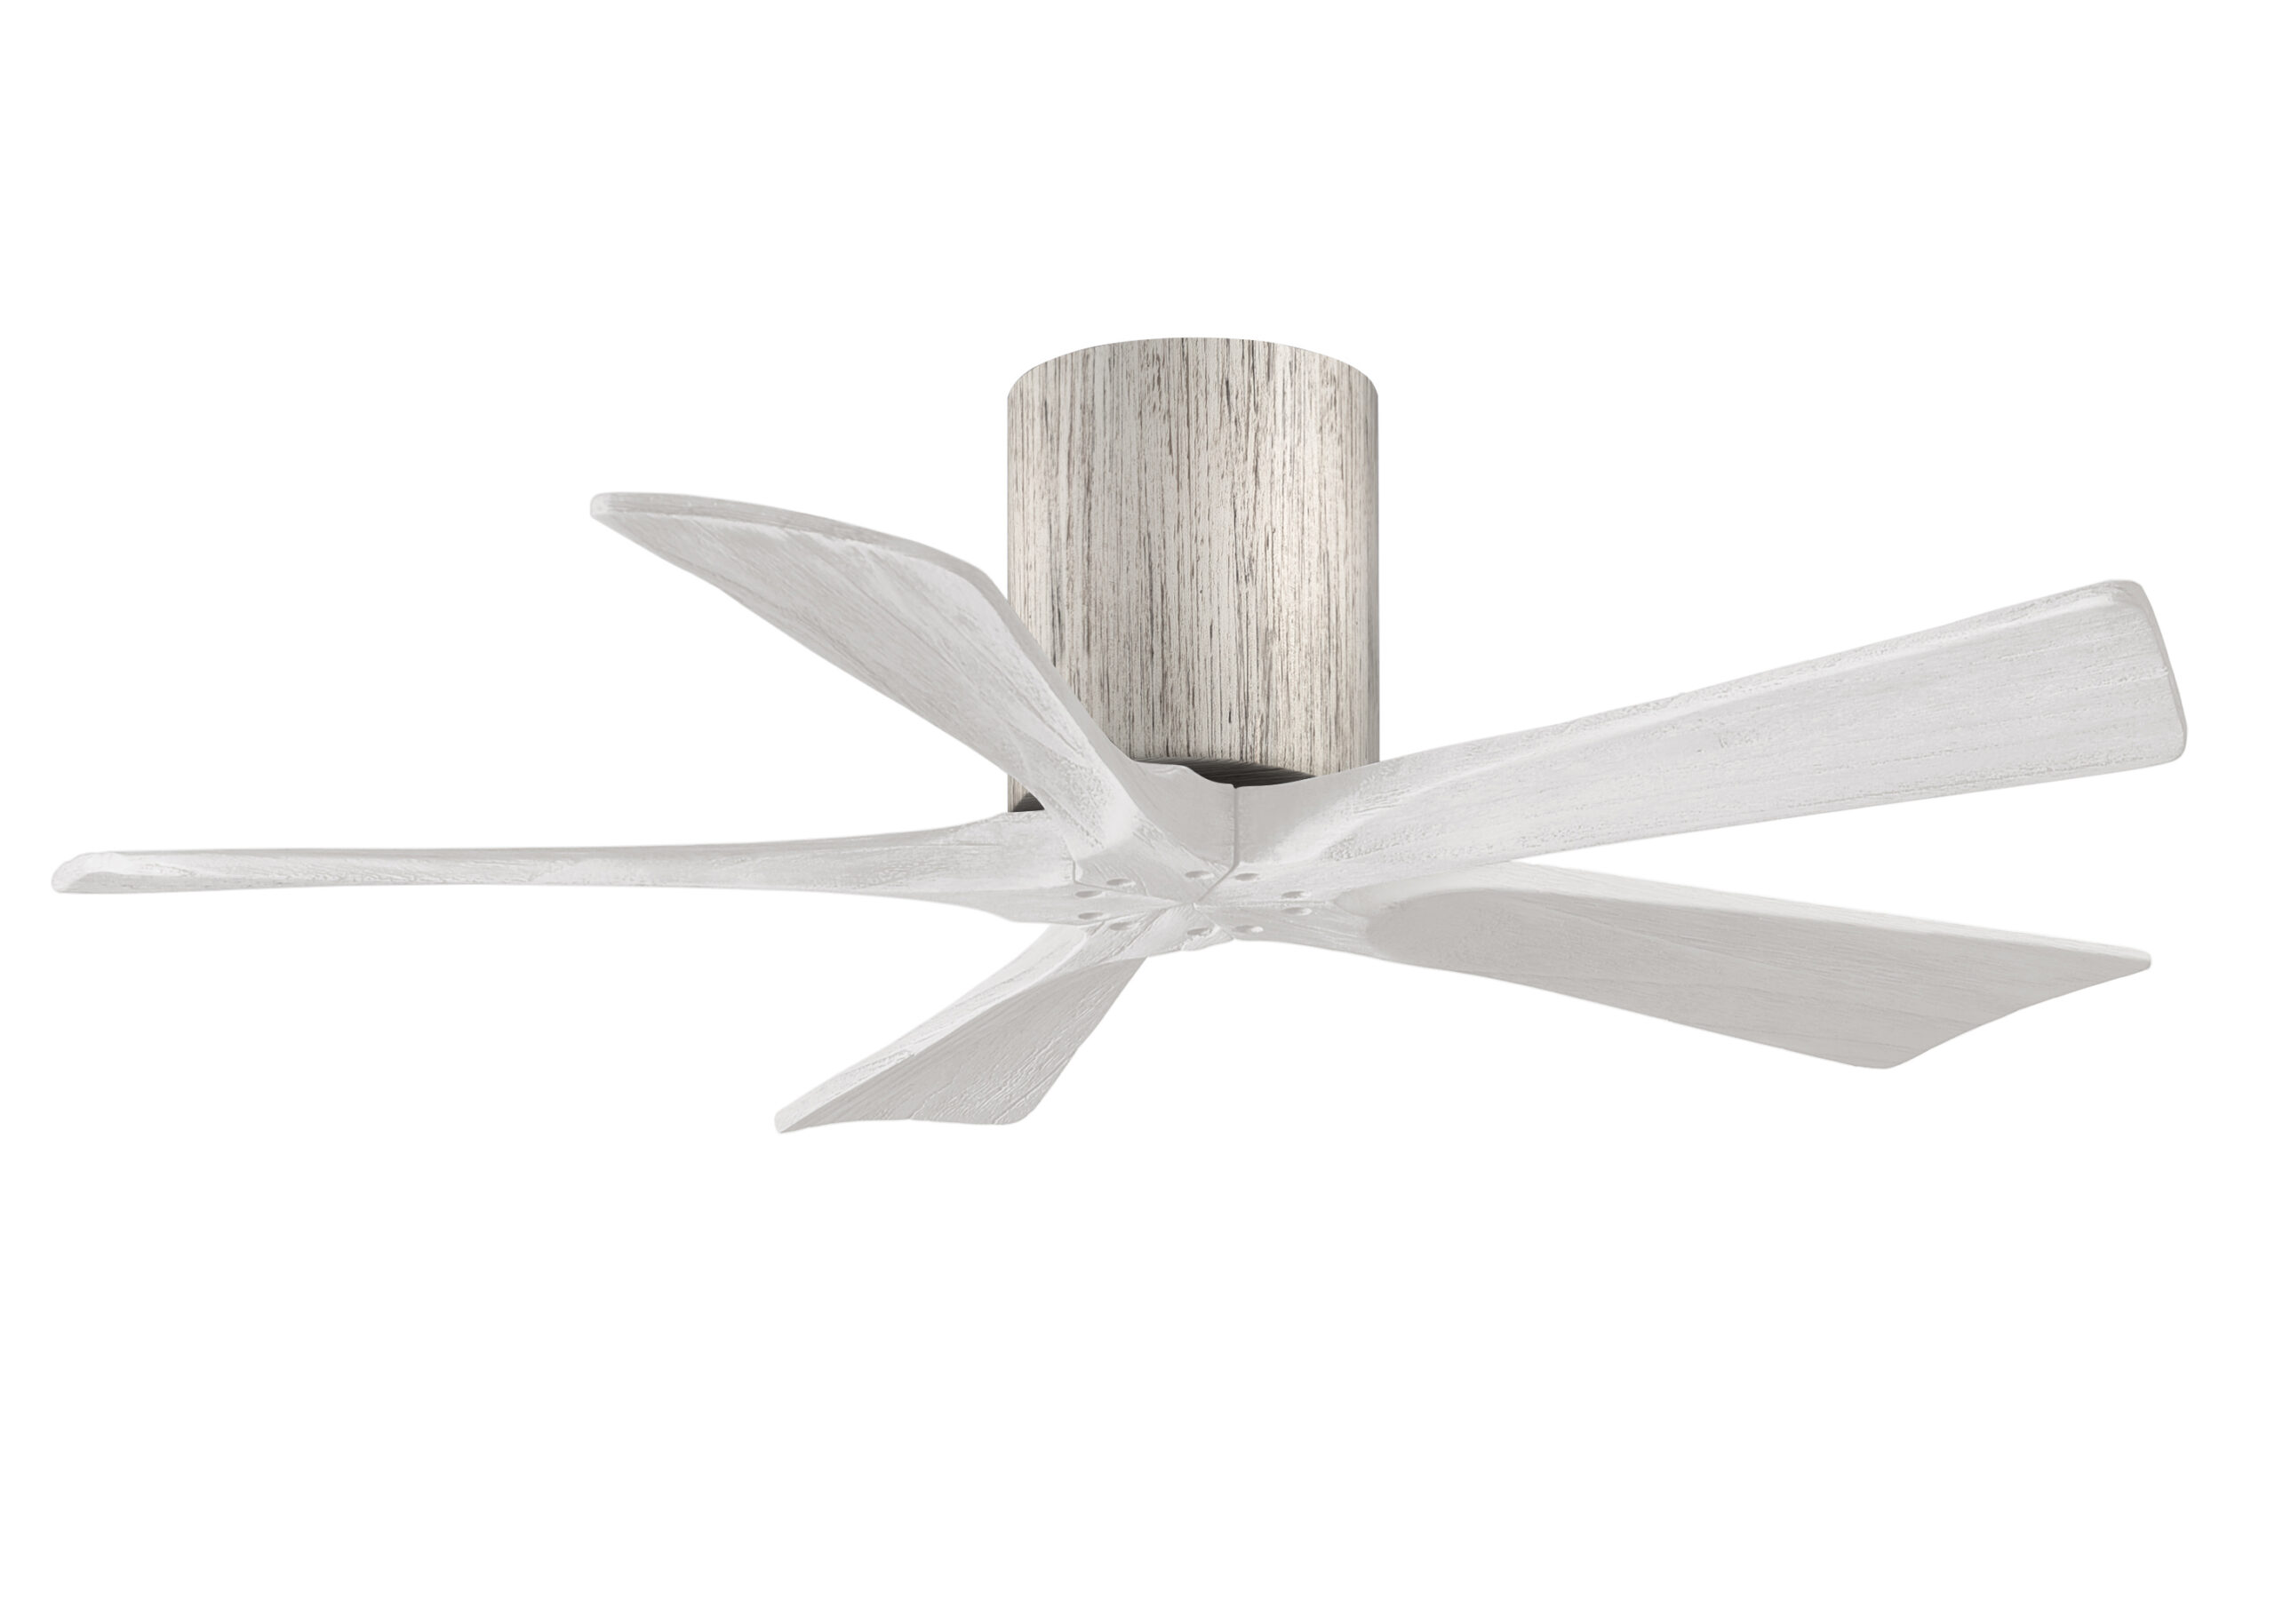 Irene-5H Ceiling Fan in Barn Wood Finish with 42